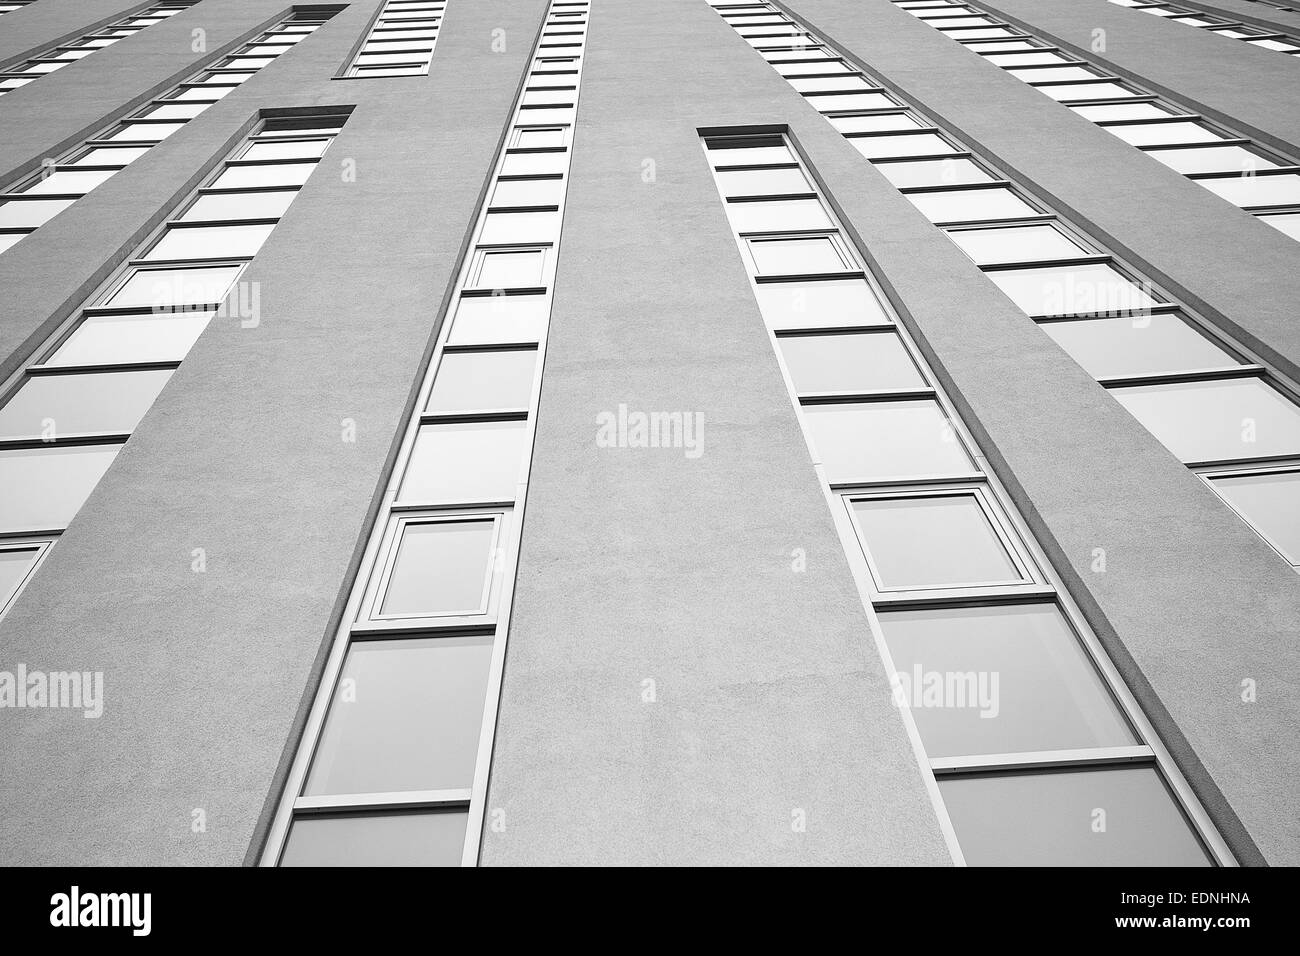 Abstract architecture in black and white Stock Photo